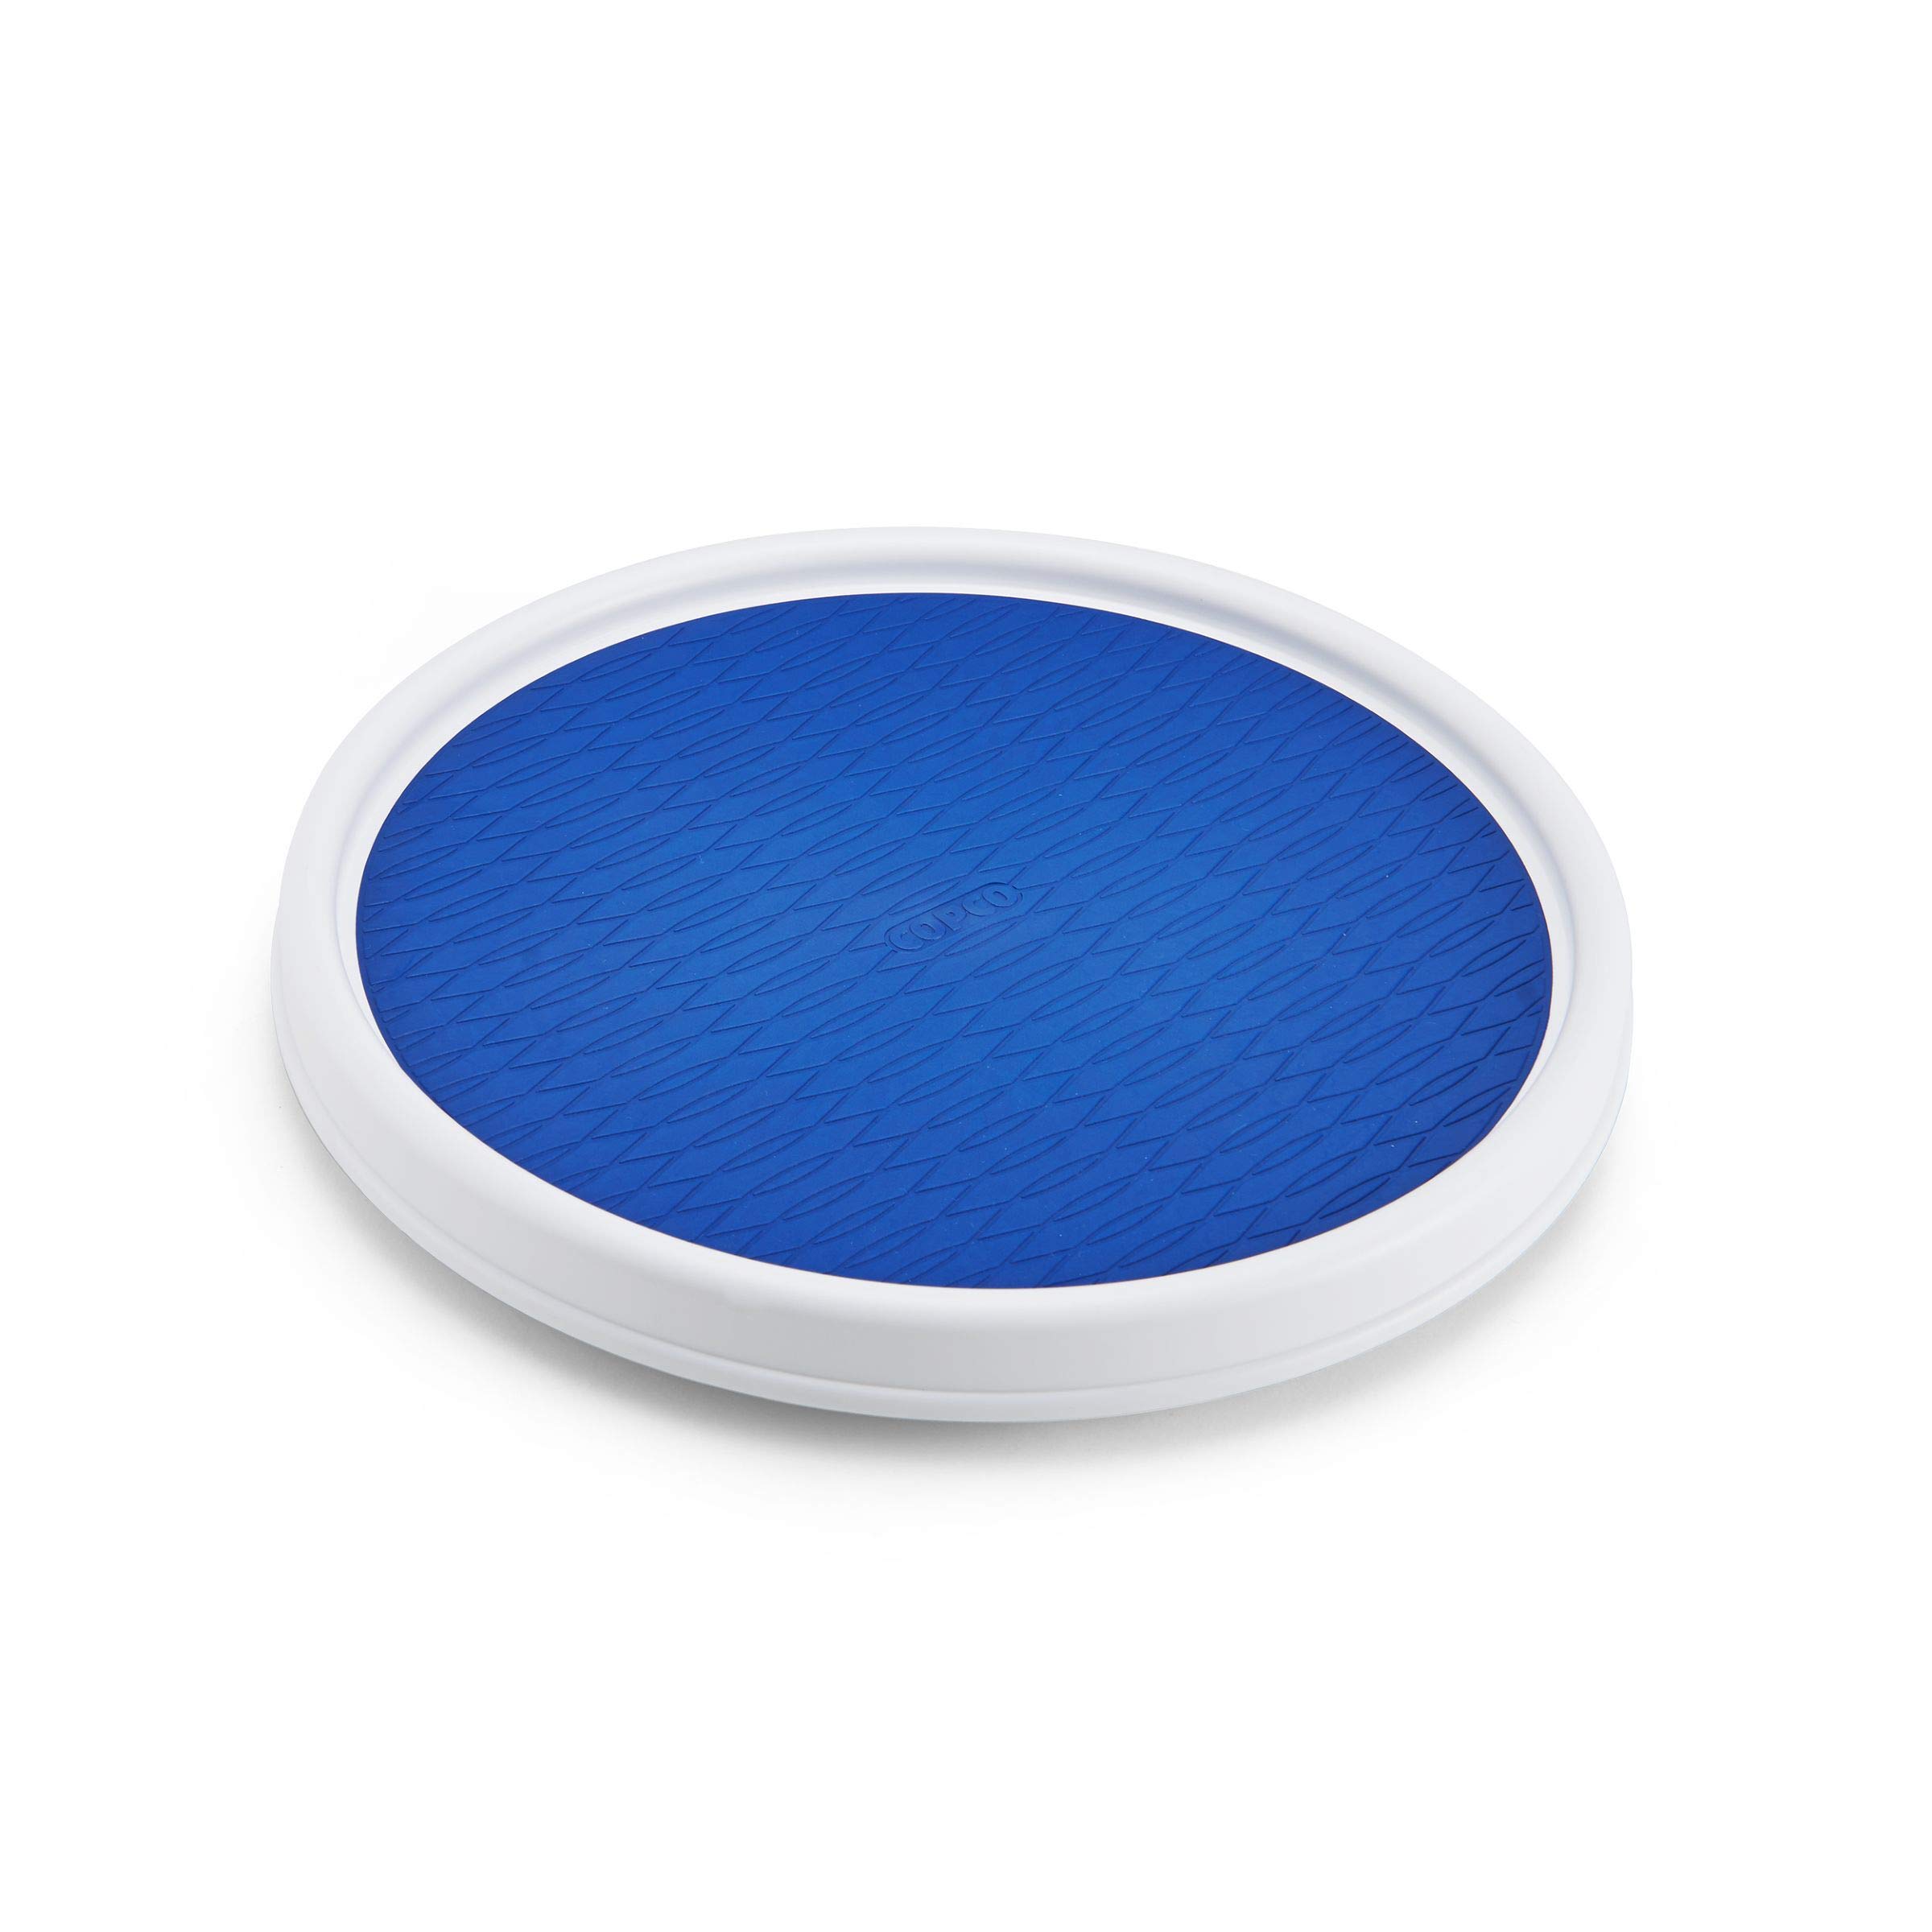 12" Copco Basics Non-Skid Lazy Susan Turntable (White/Blue) $6.30 + Free Shipping w/ Prime or on orders over $35